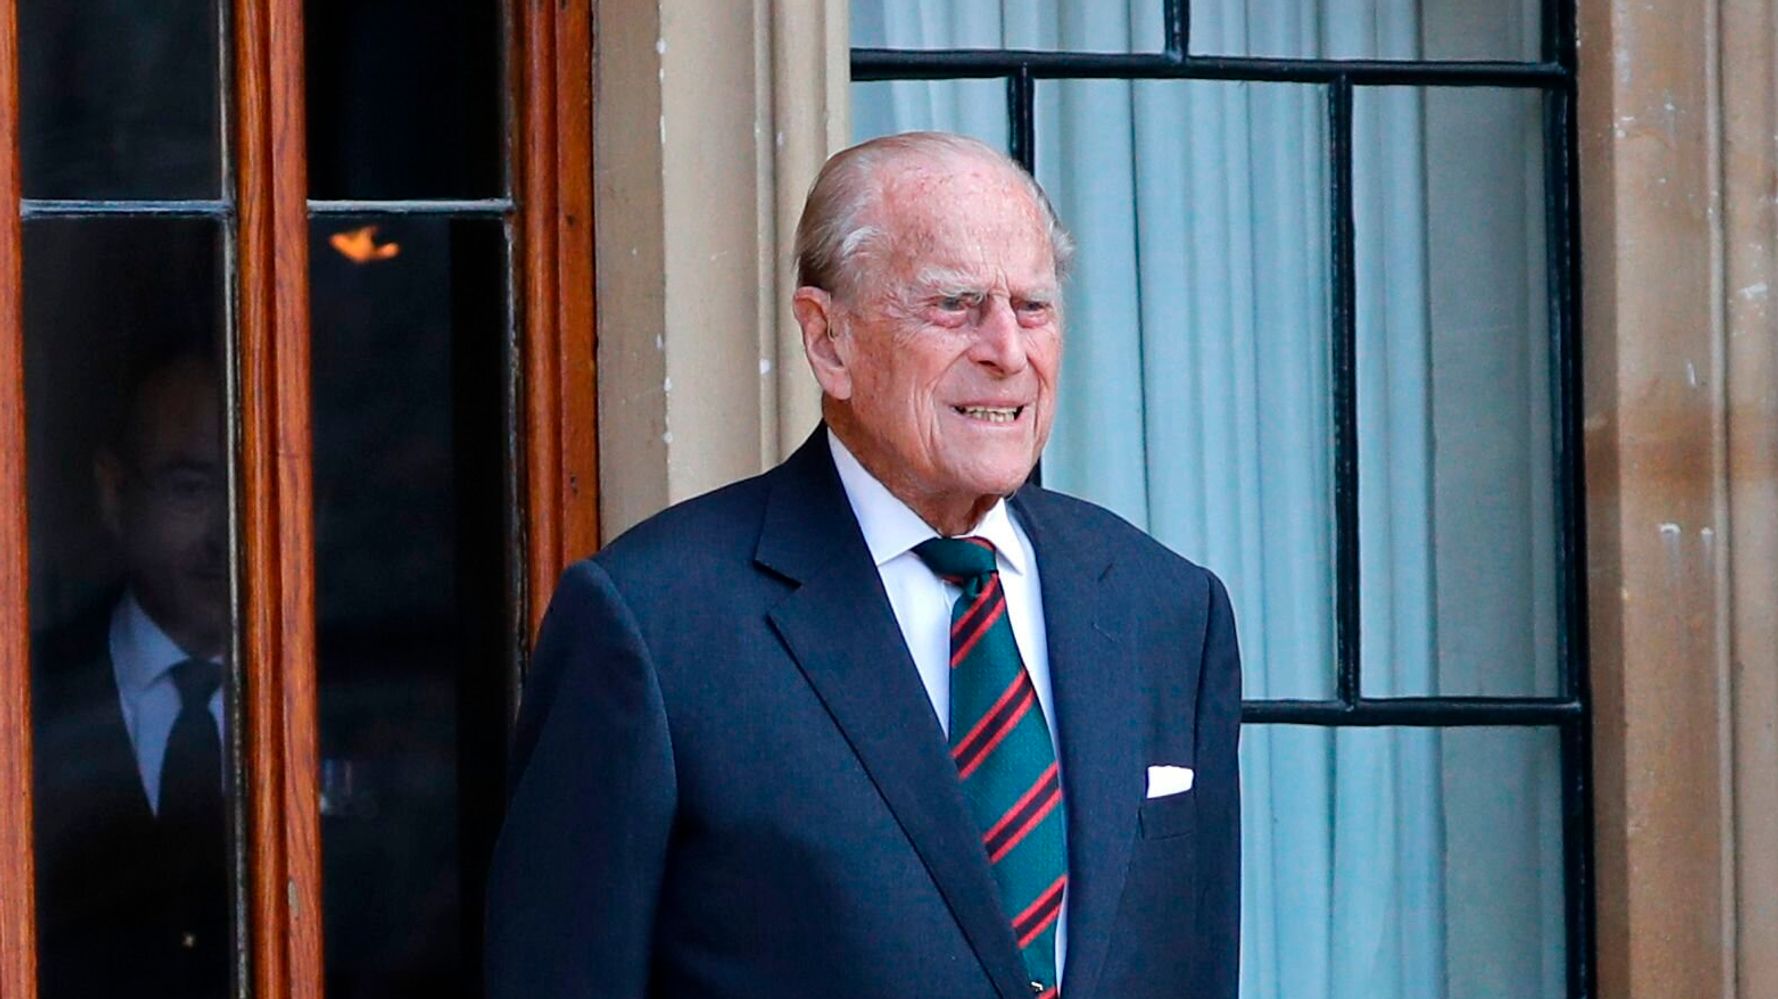 Buckingham Palace offers an update on Prince Philip’s condition